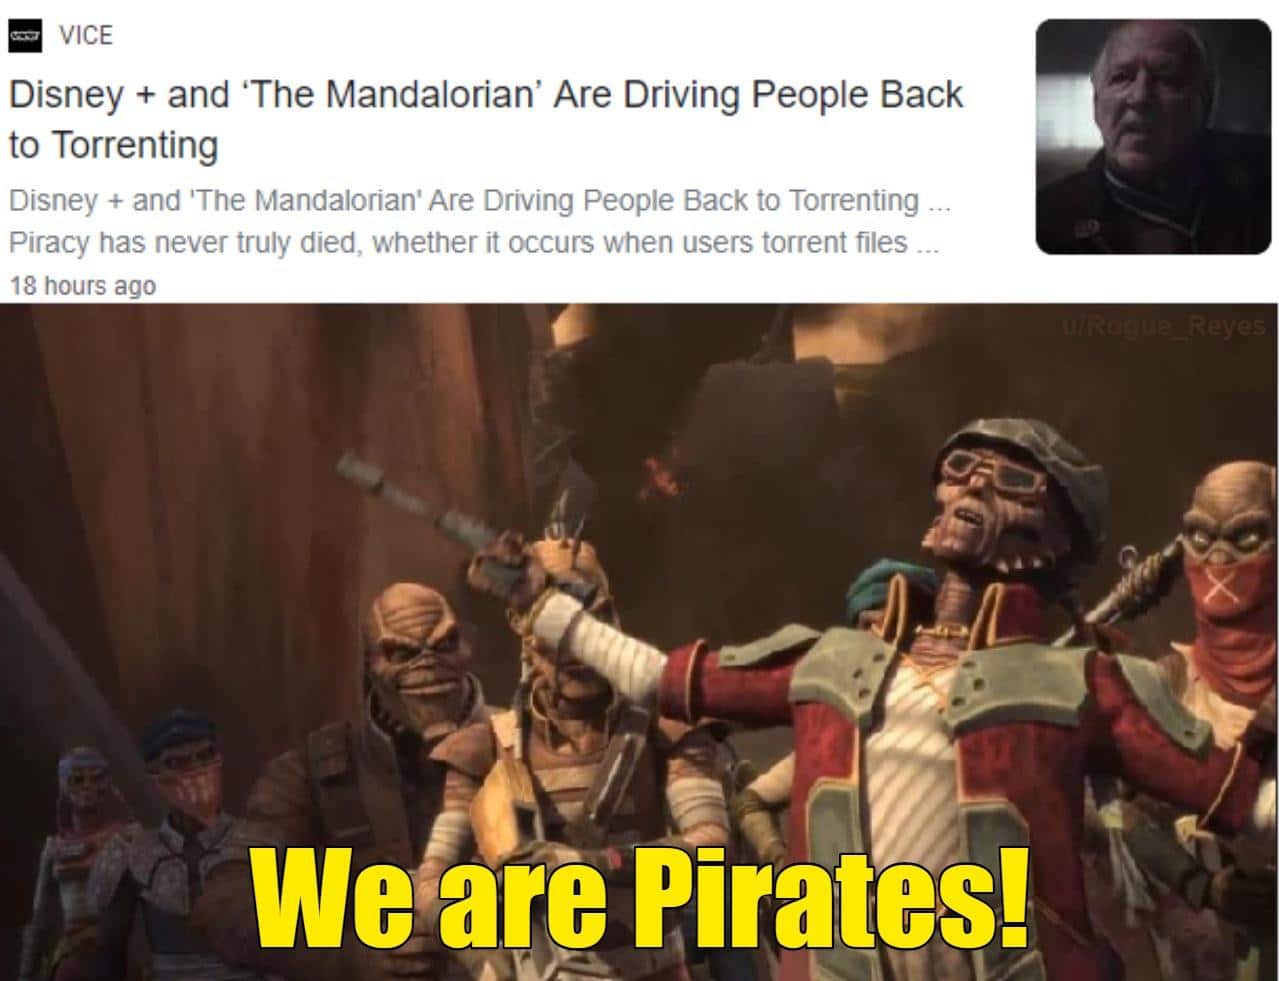 prequel-memes star-wars-memes prequel-memes text: VICE Disney + and 'The Mandalorian' Are Driving People Back to Torrenting Disney + and 'The Mandalorian' Are Driving People Back to Torrenting Piracy has never truly died, whether it occurs when users torrent files 18 hours ago Weyate pirates! 